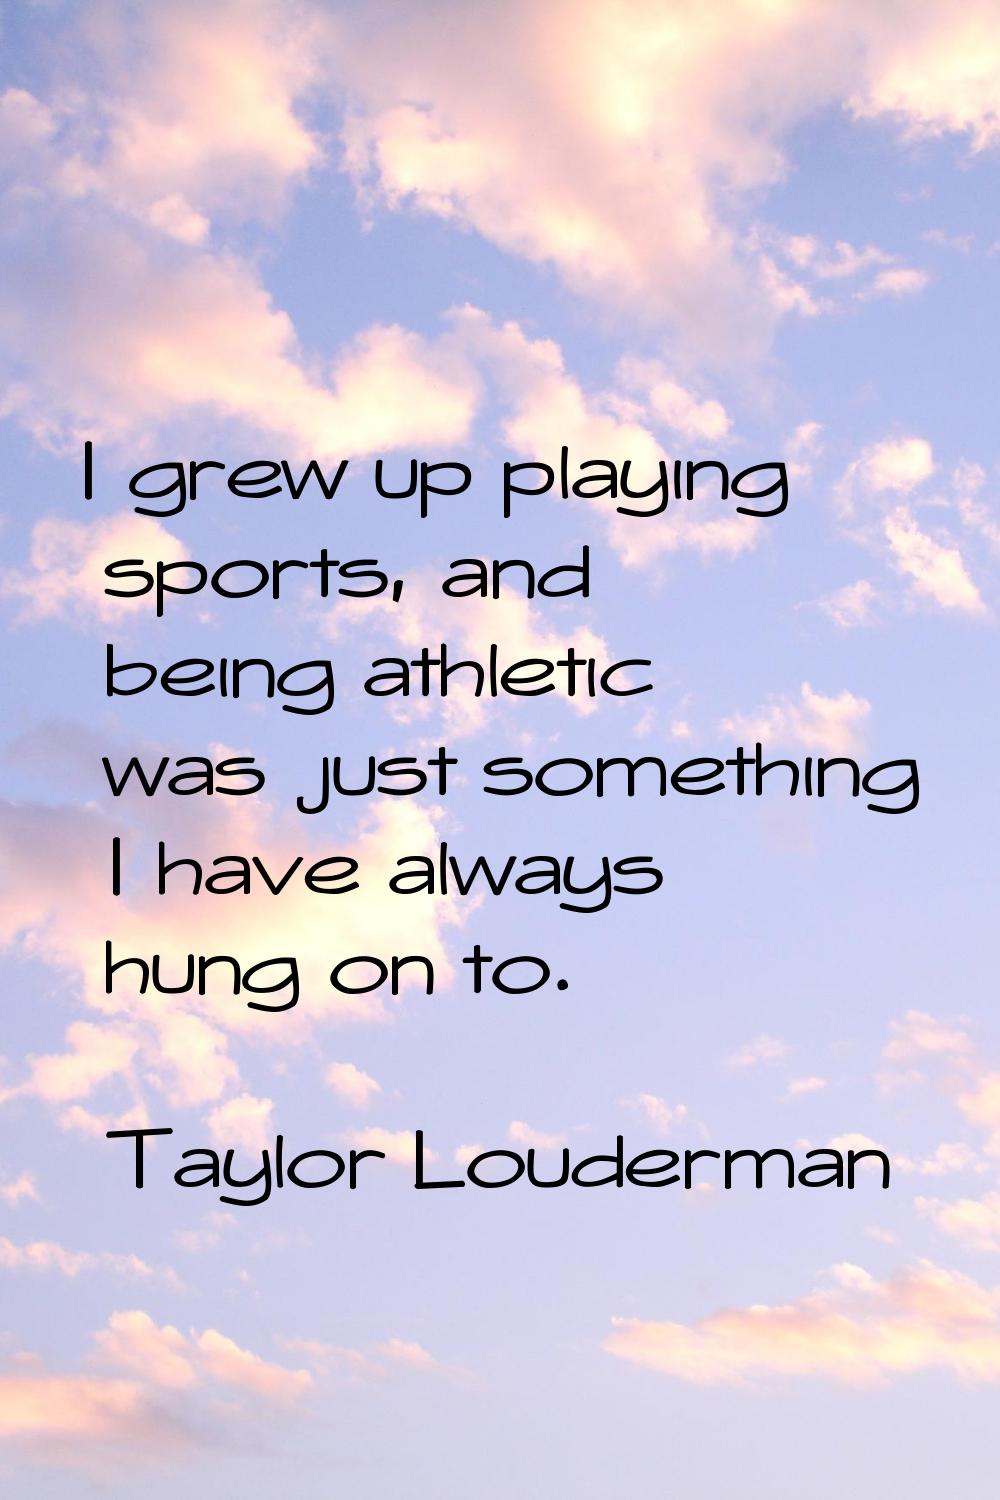 I grew up playing sports, and being athletic was just something I have always hung on to.